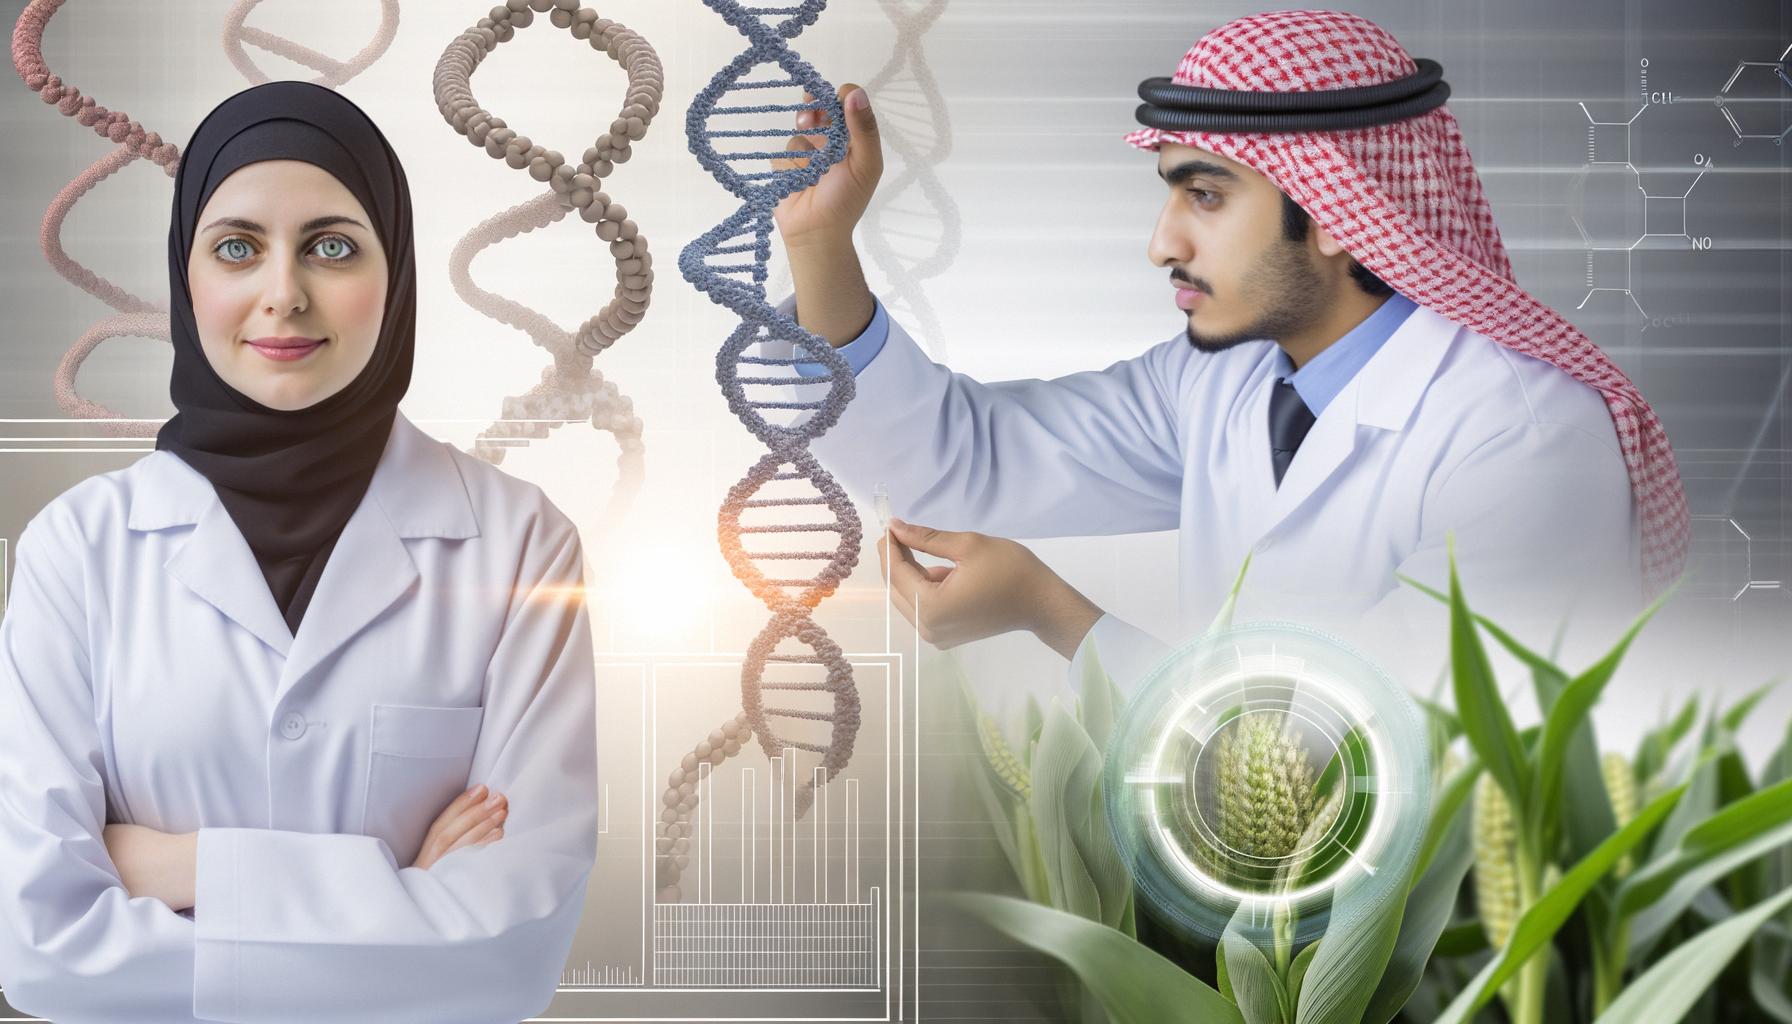 Biotechnology shows significant innovation and global cooperation.